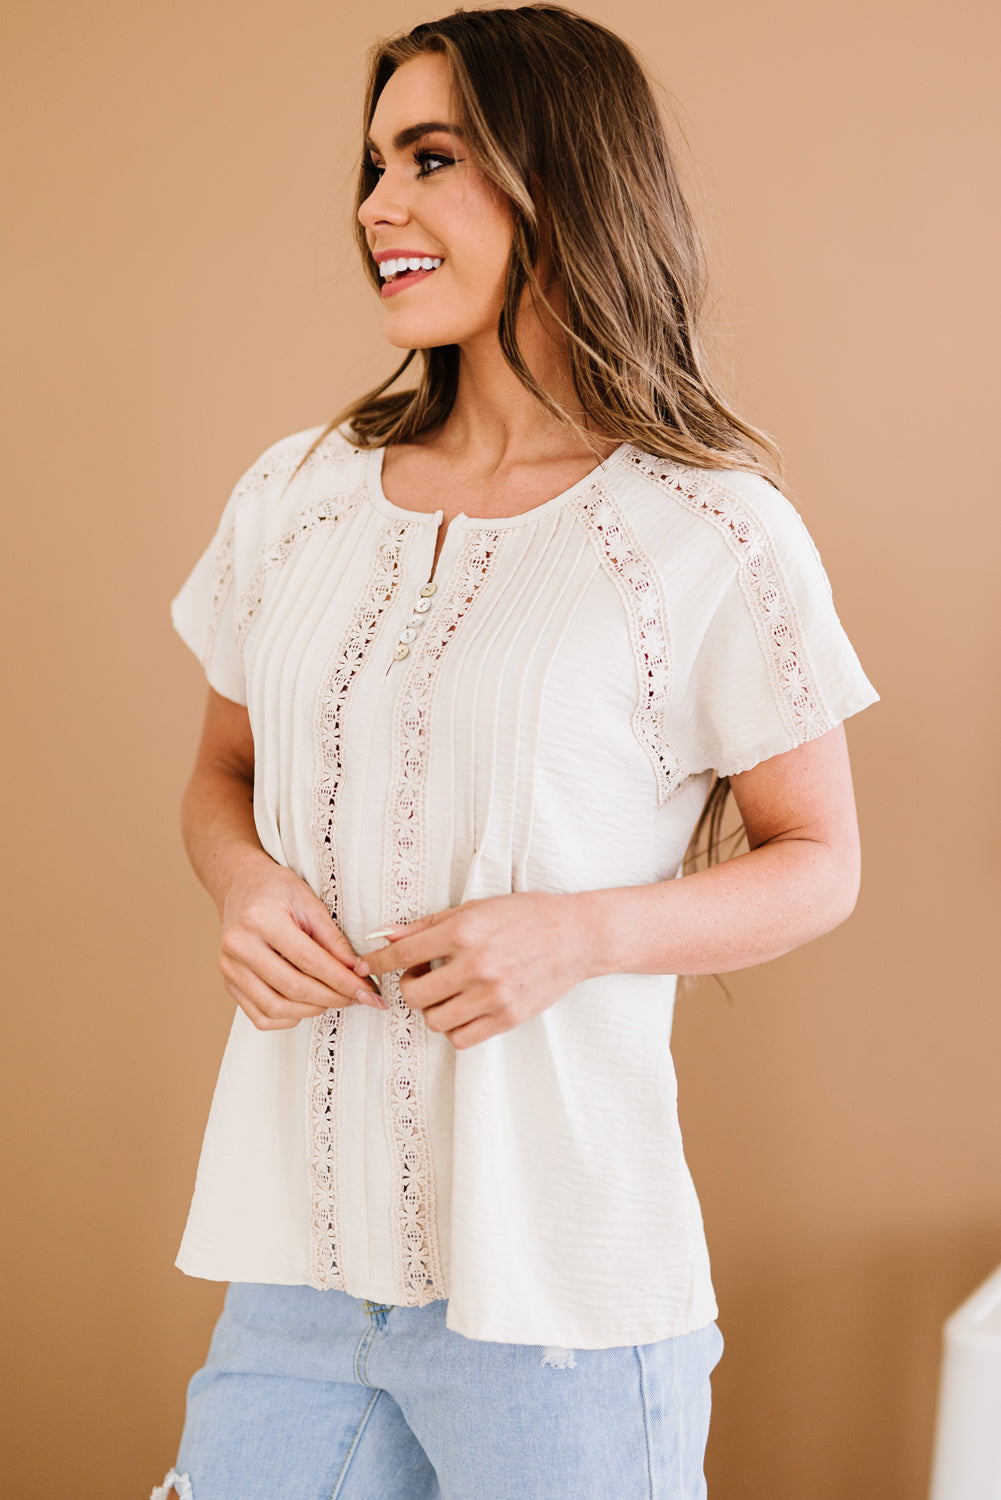 Tropic Pacific Crochet Eyelet Buttoned Short Sleeves Top